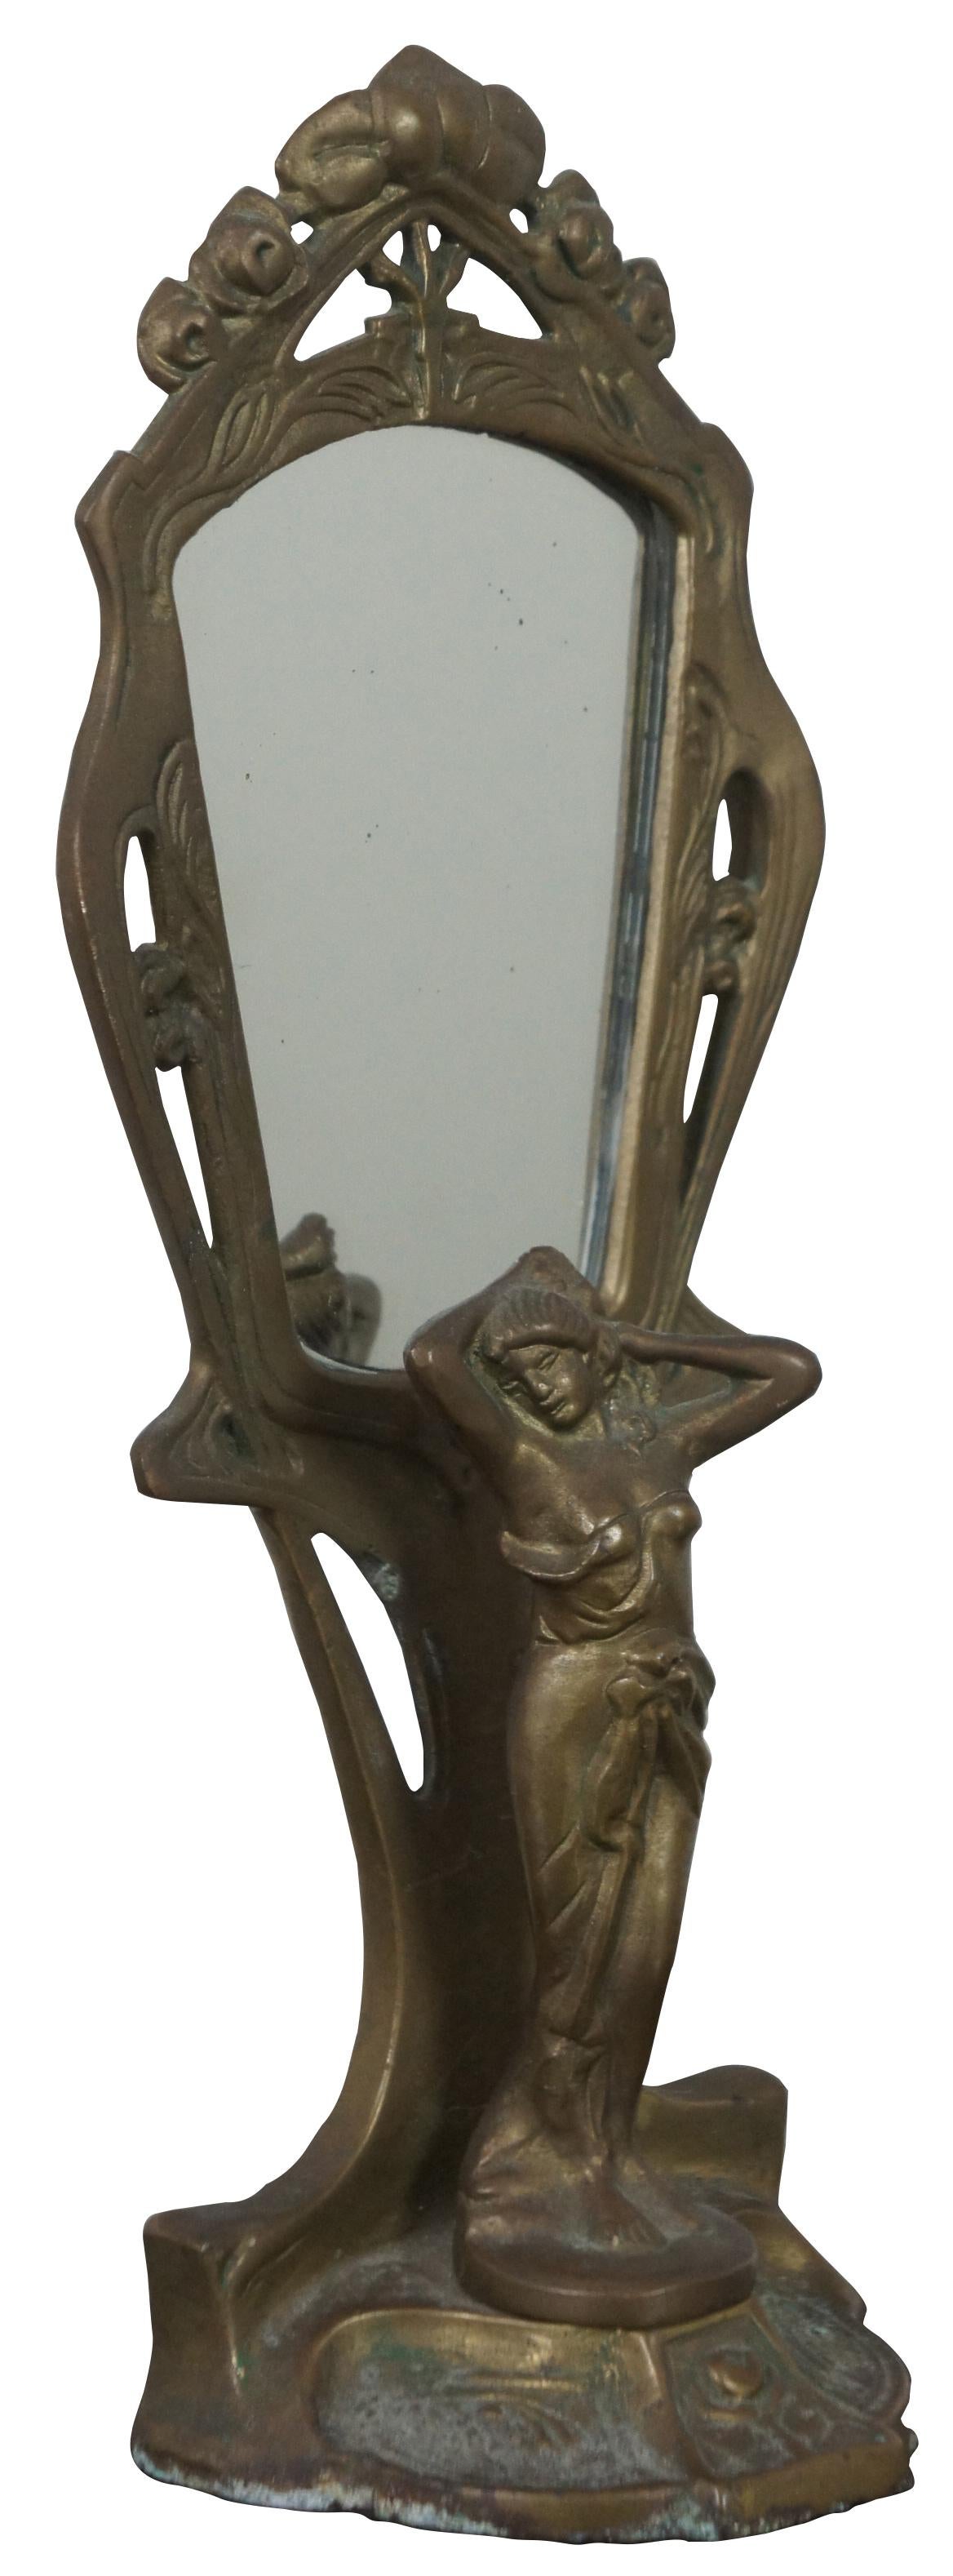 Art Nouveau style, solid brass tabletop mirror with a classical female figure on the base brushing her hair. Measures: 12